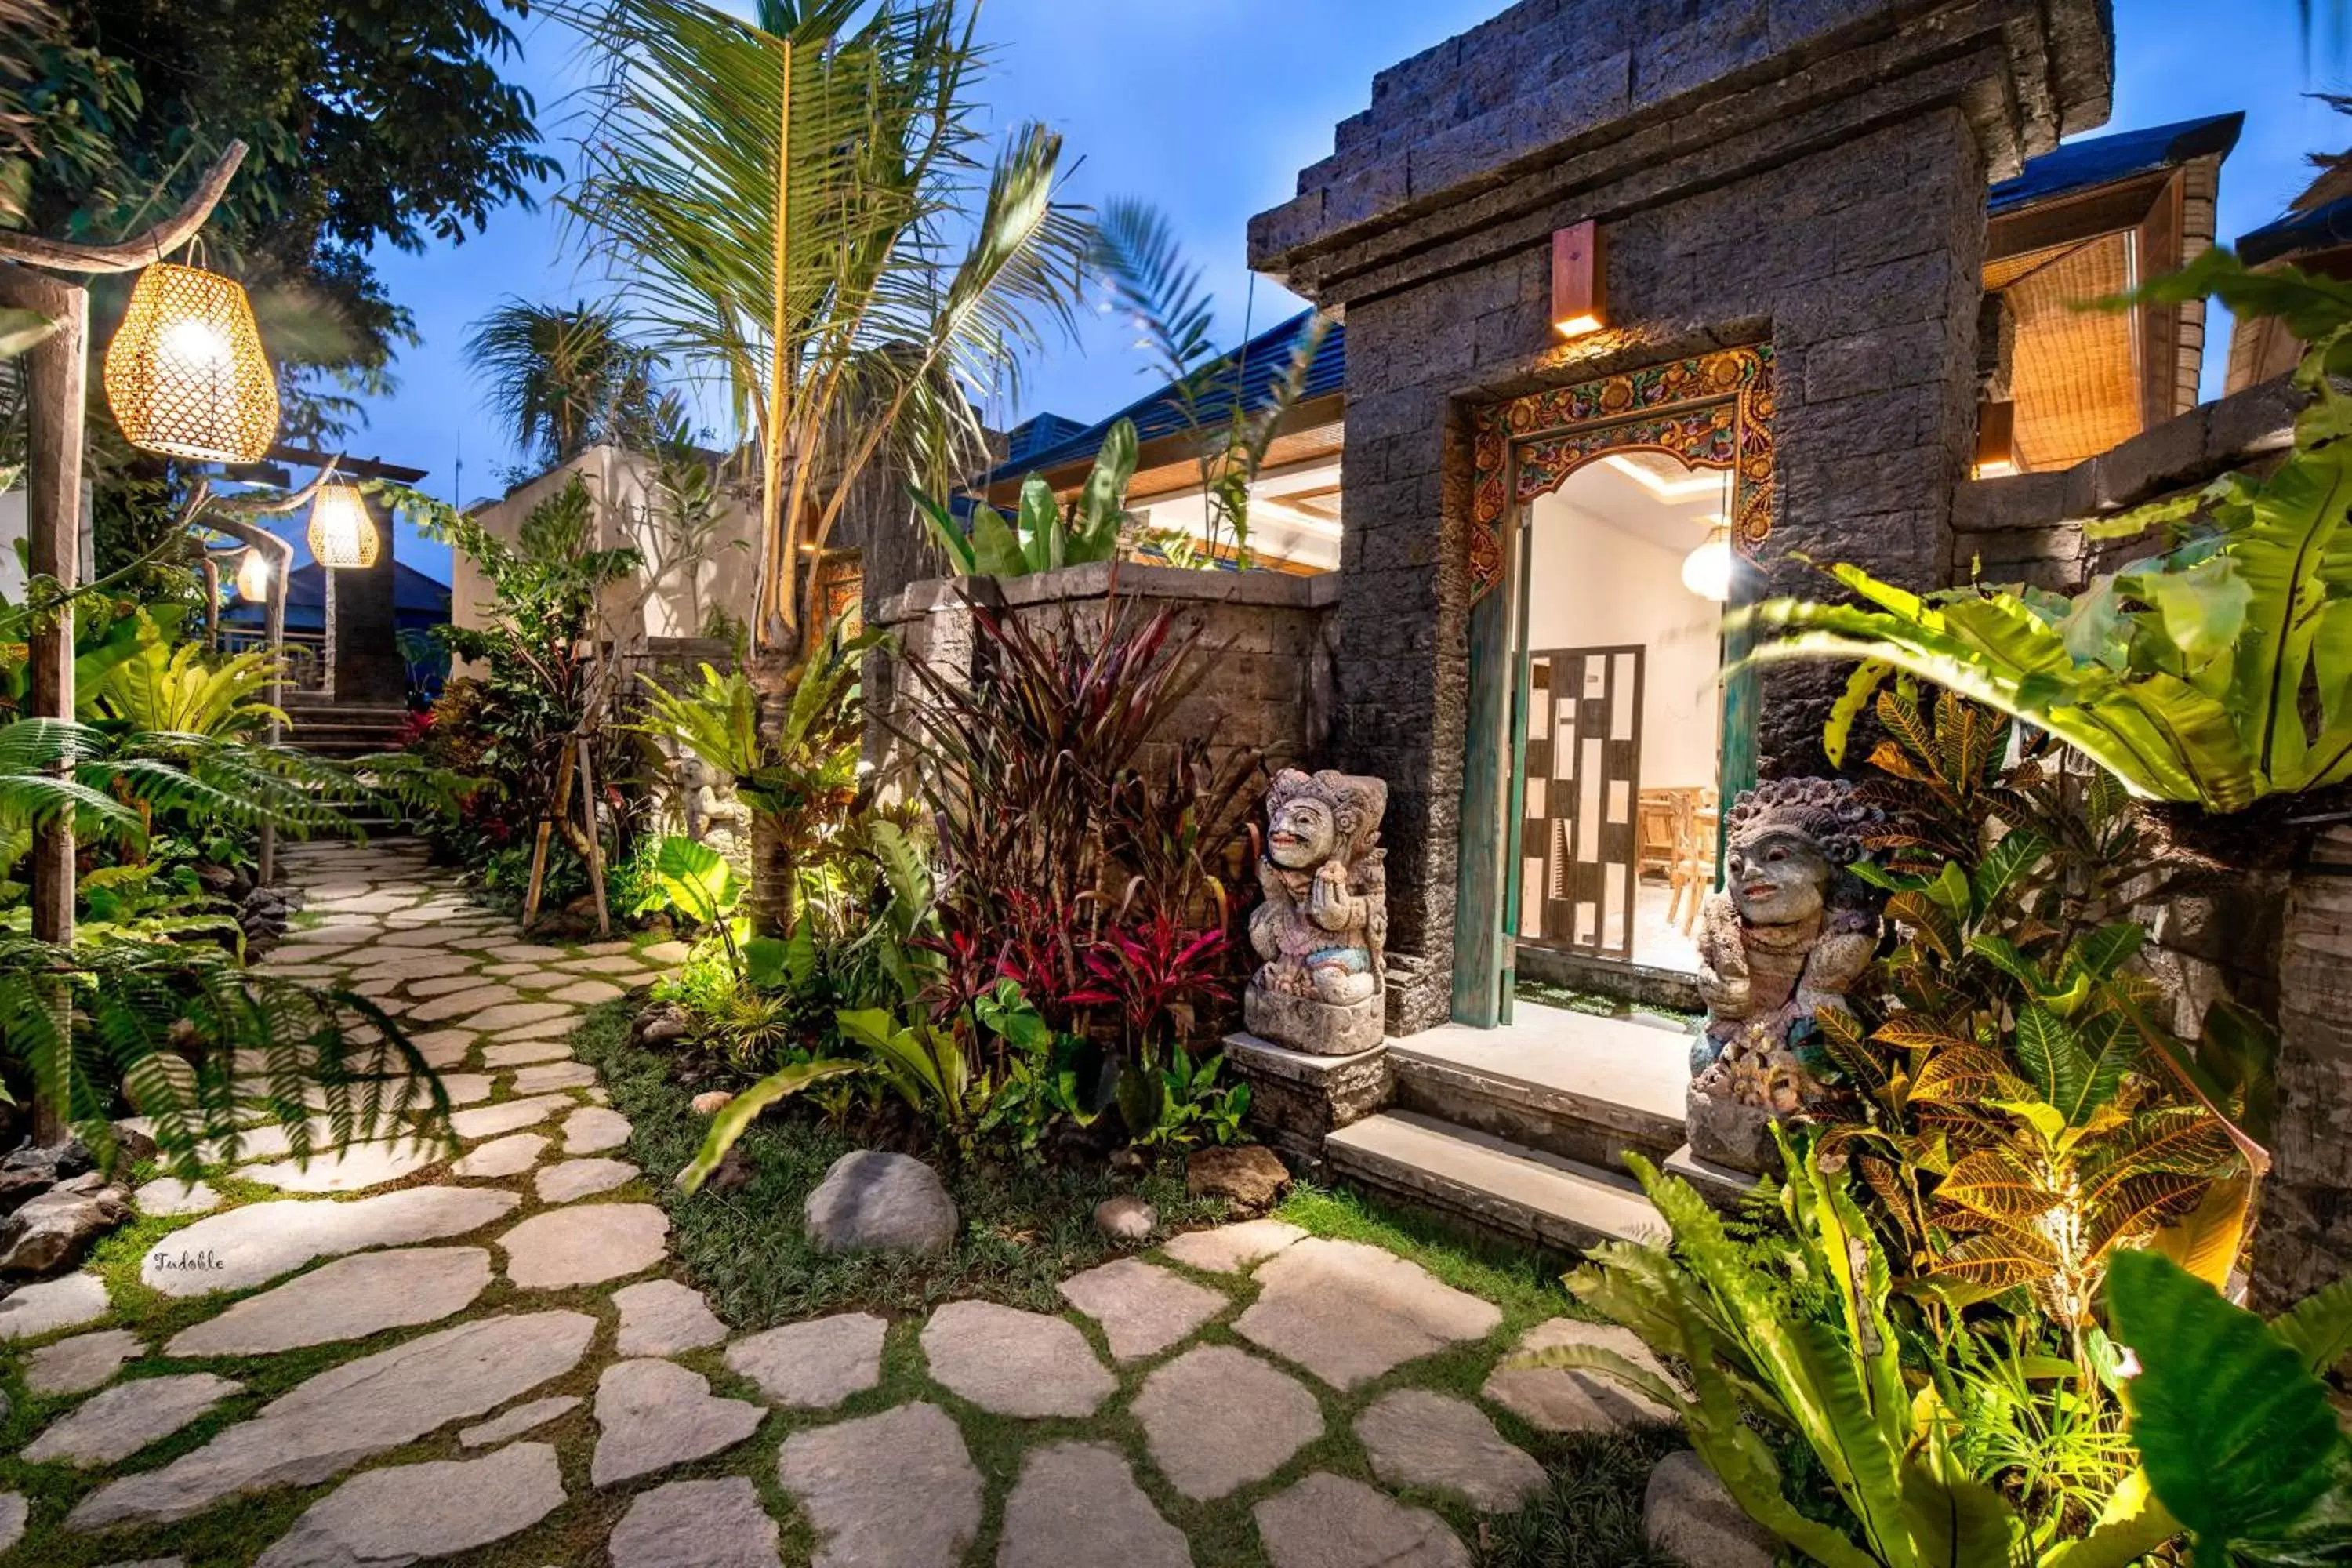 Area and facilities in Bliss Ubud Spa Resort